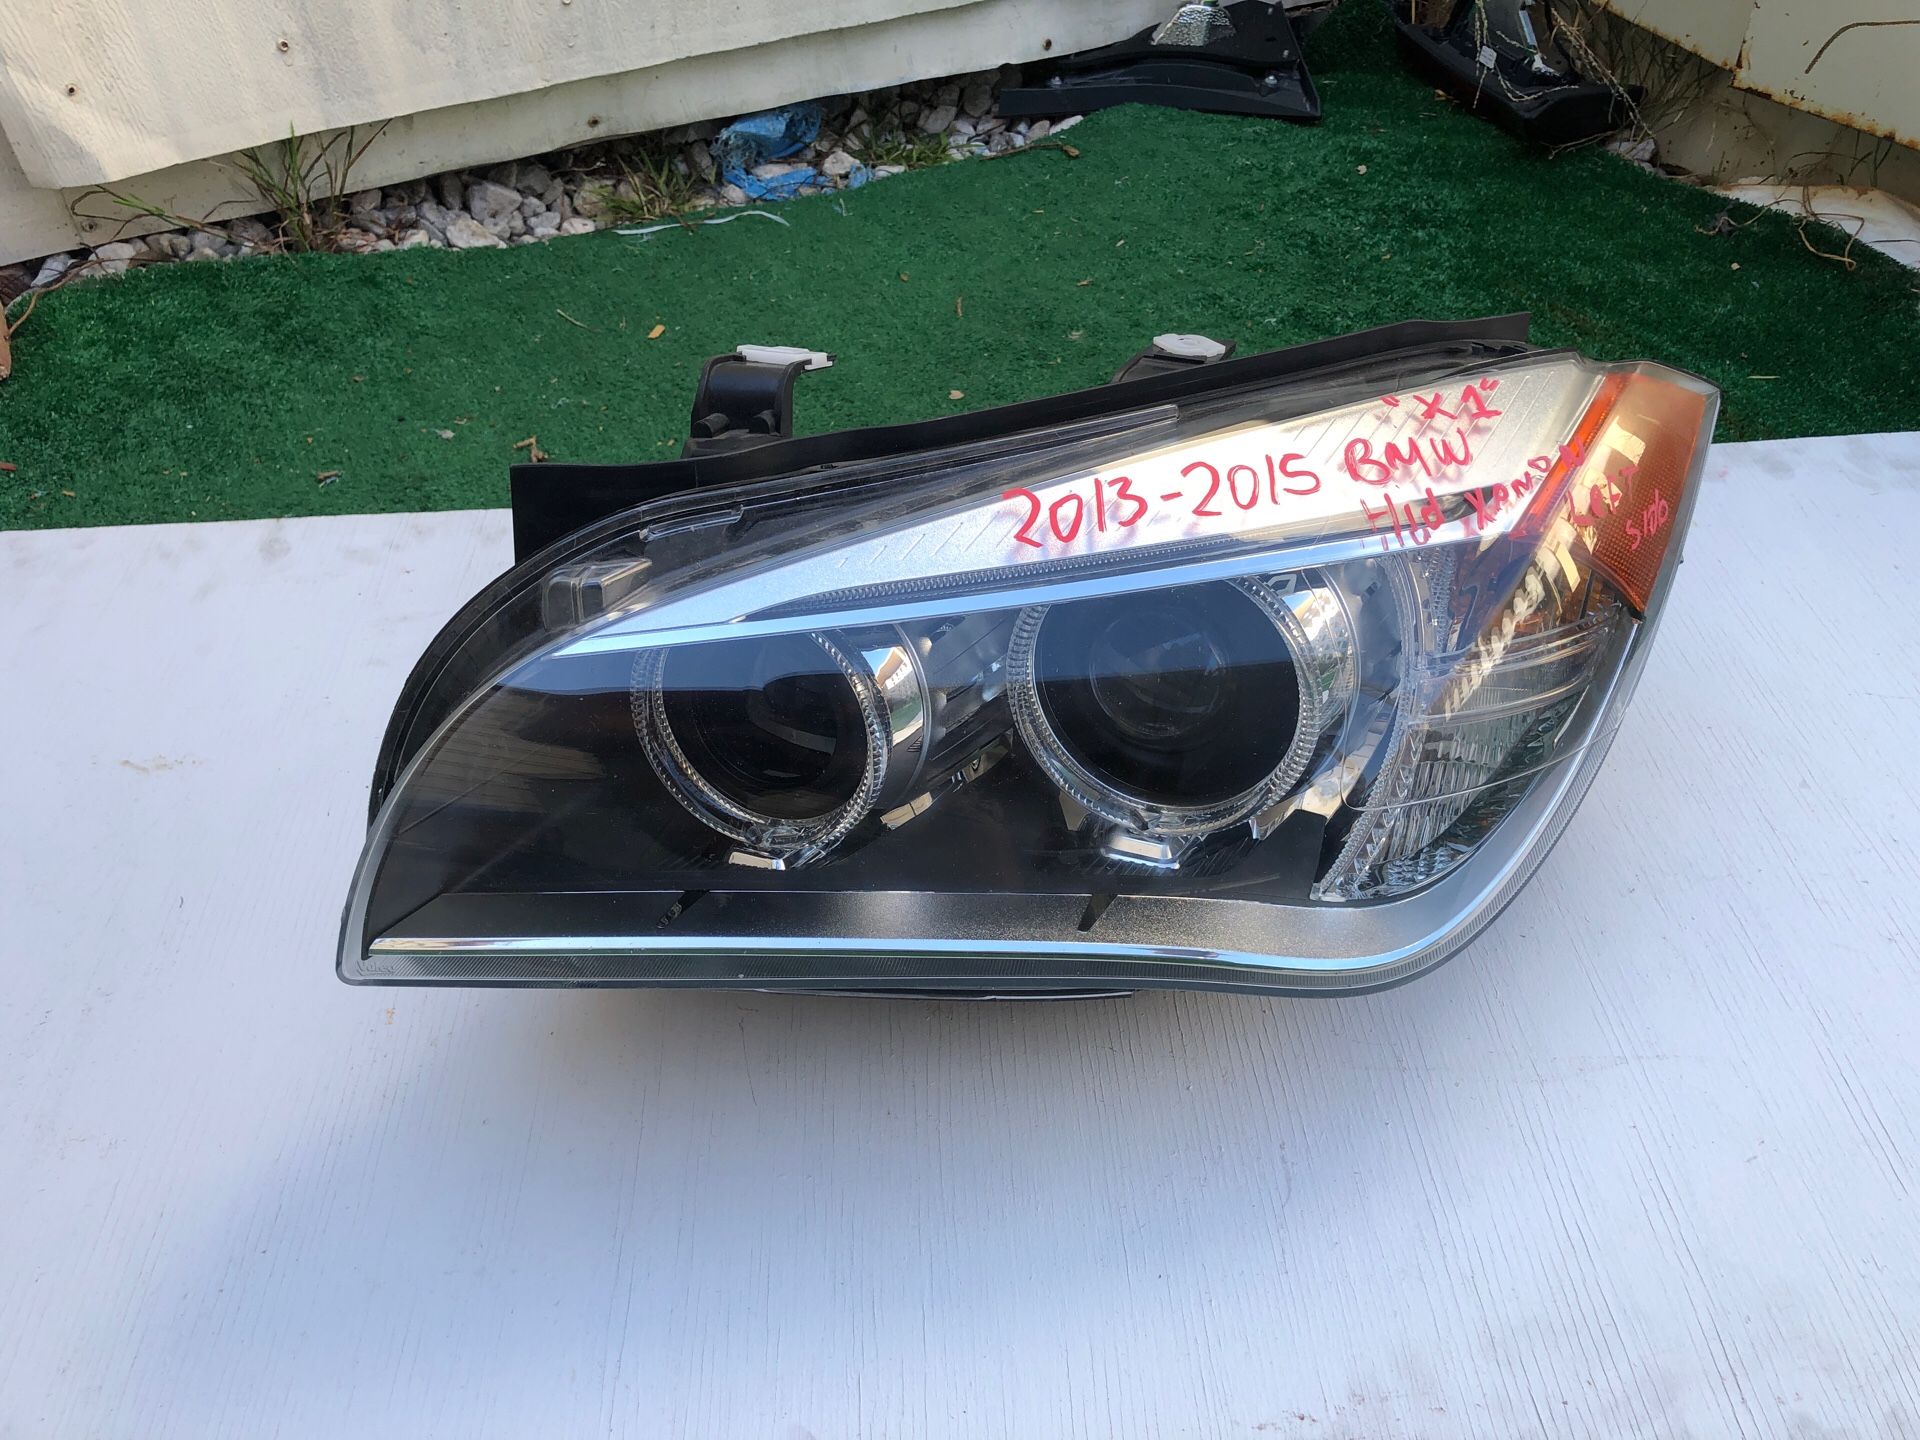 2013-2014-2015 BMW X1 HEADLIGHT LEFT DRIVER SIDE HID XENON OEM USED